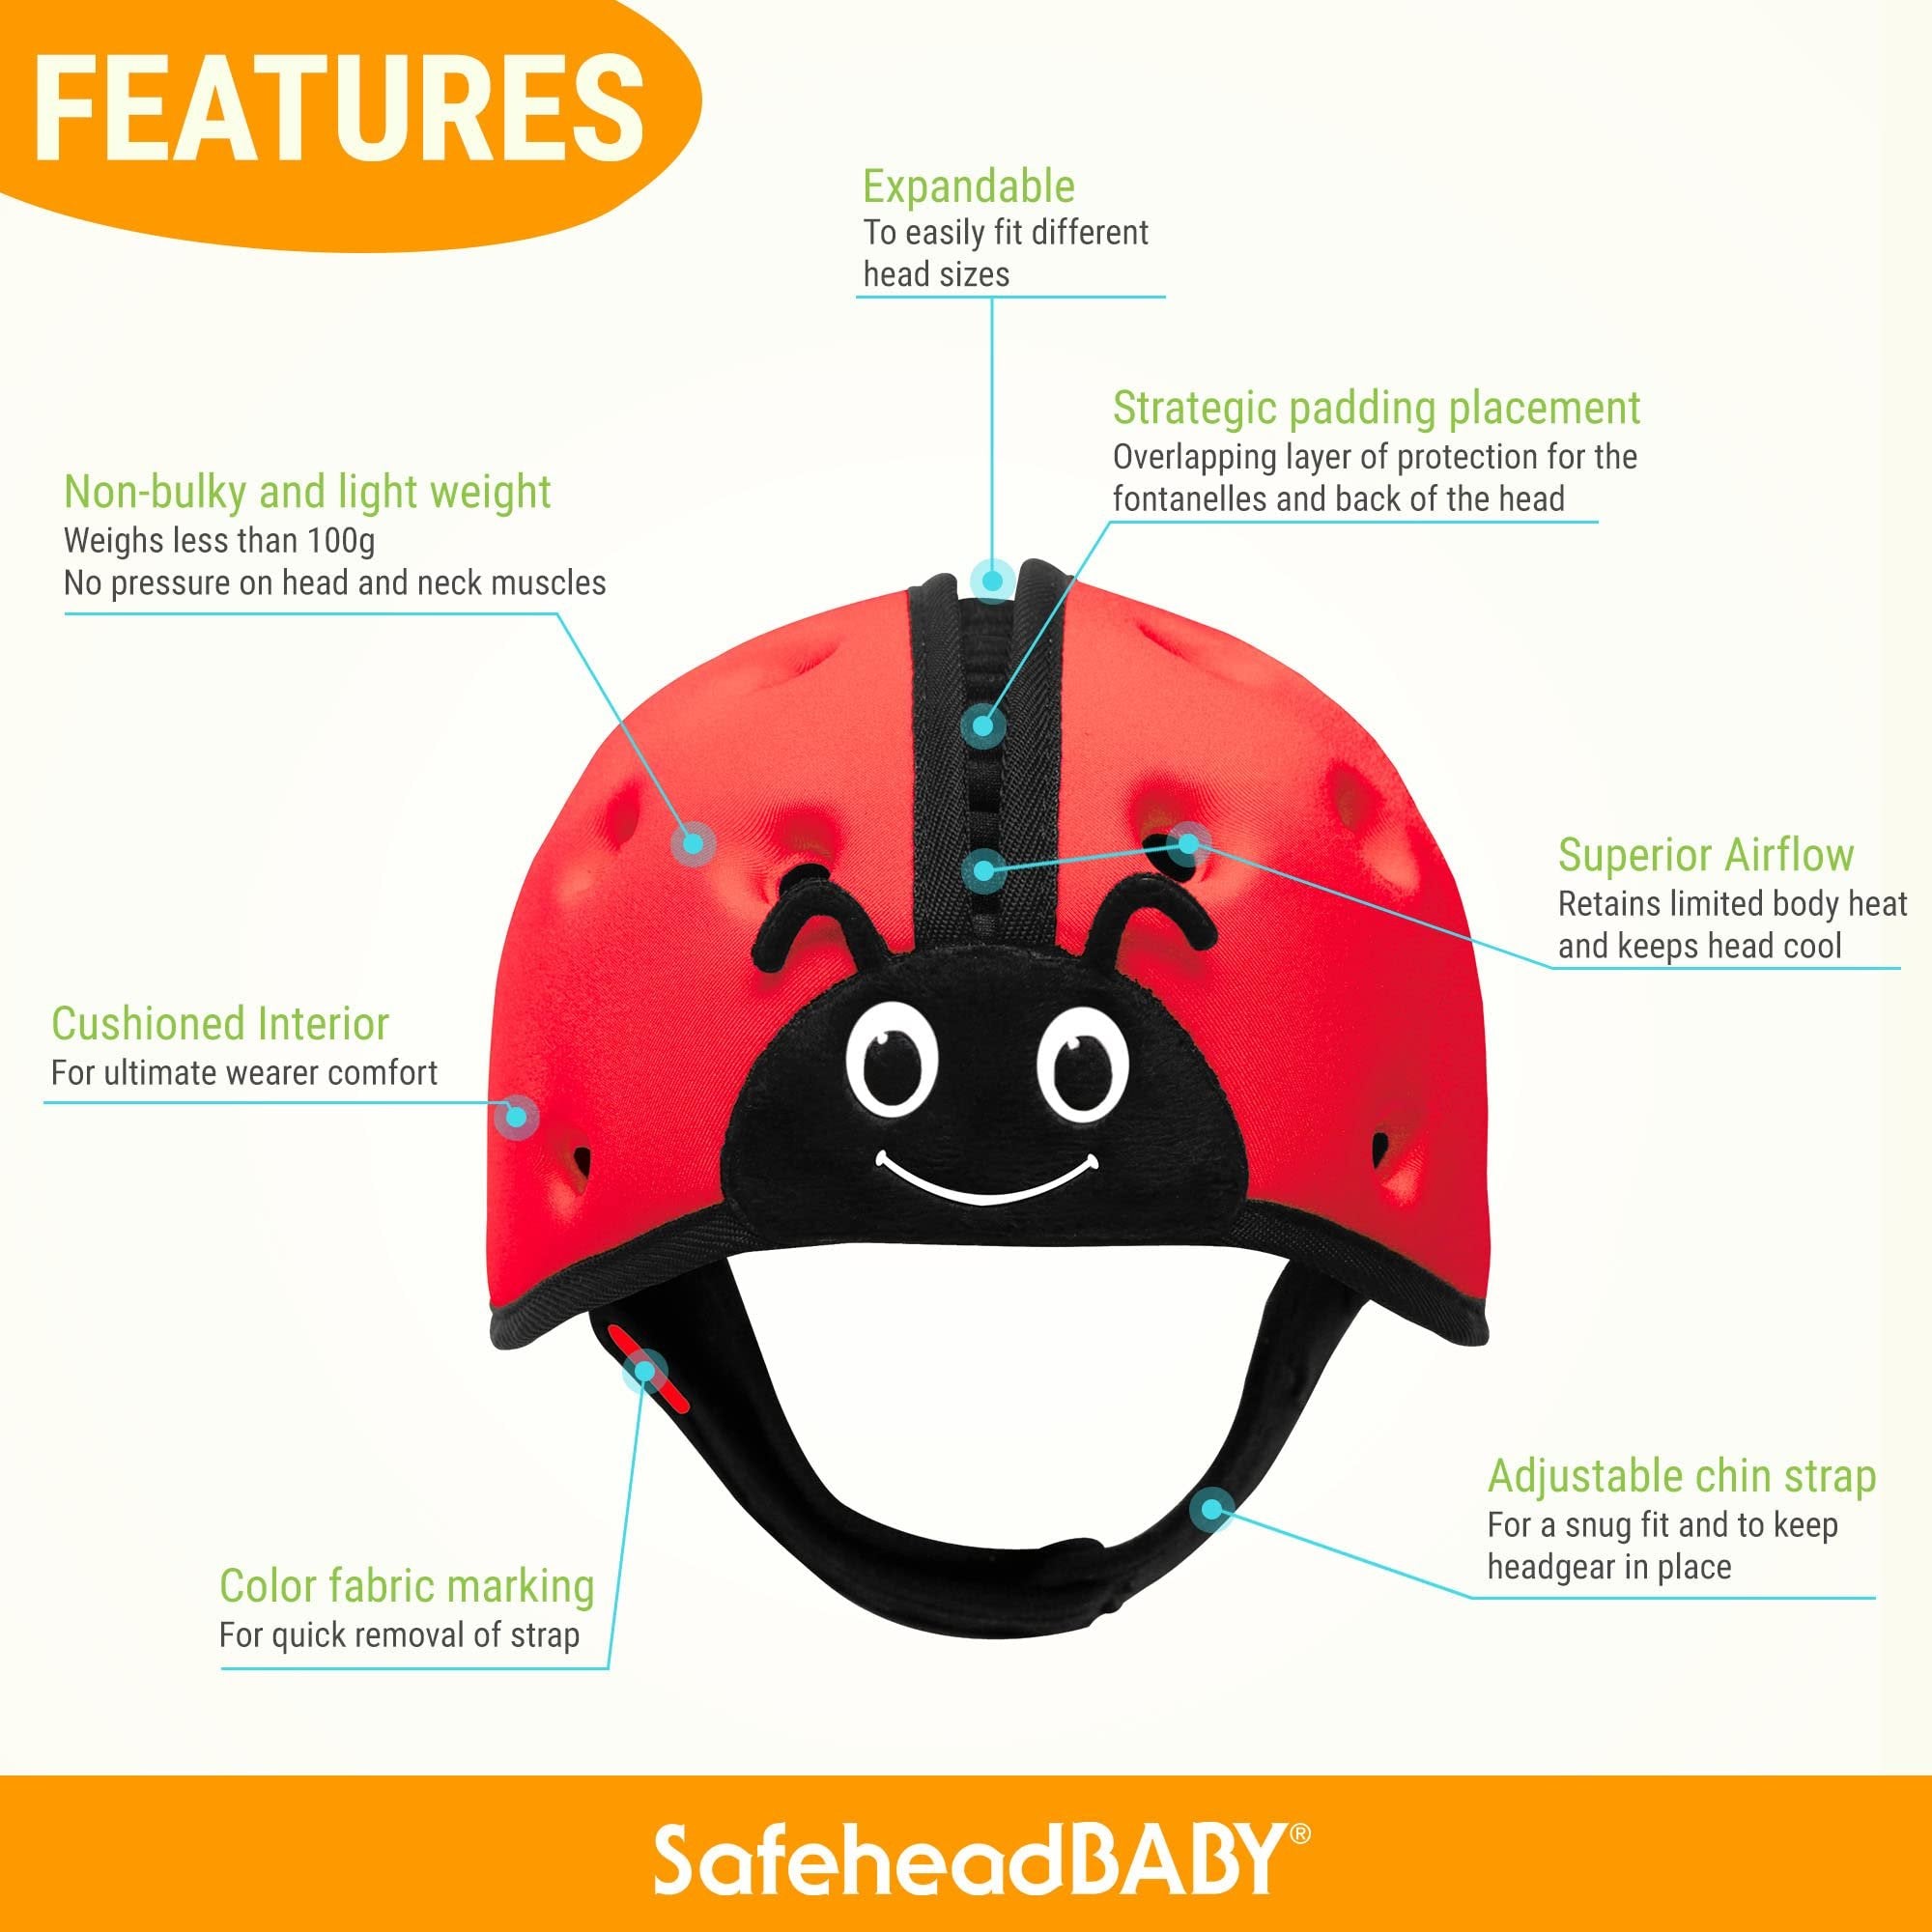 SafeheadBABY Infant Safety Helmet - Red, Adjustable, Lightweight - Size 1 Count (Pack of 1)